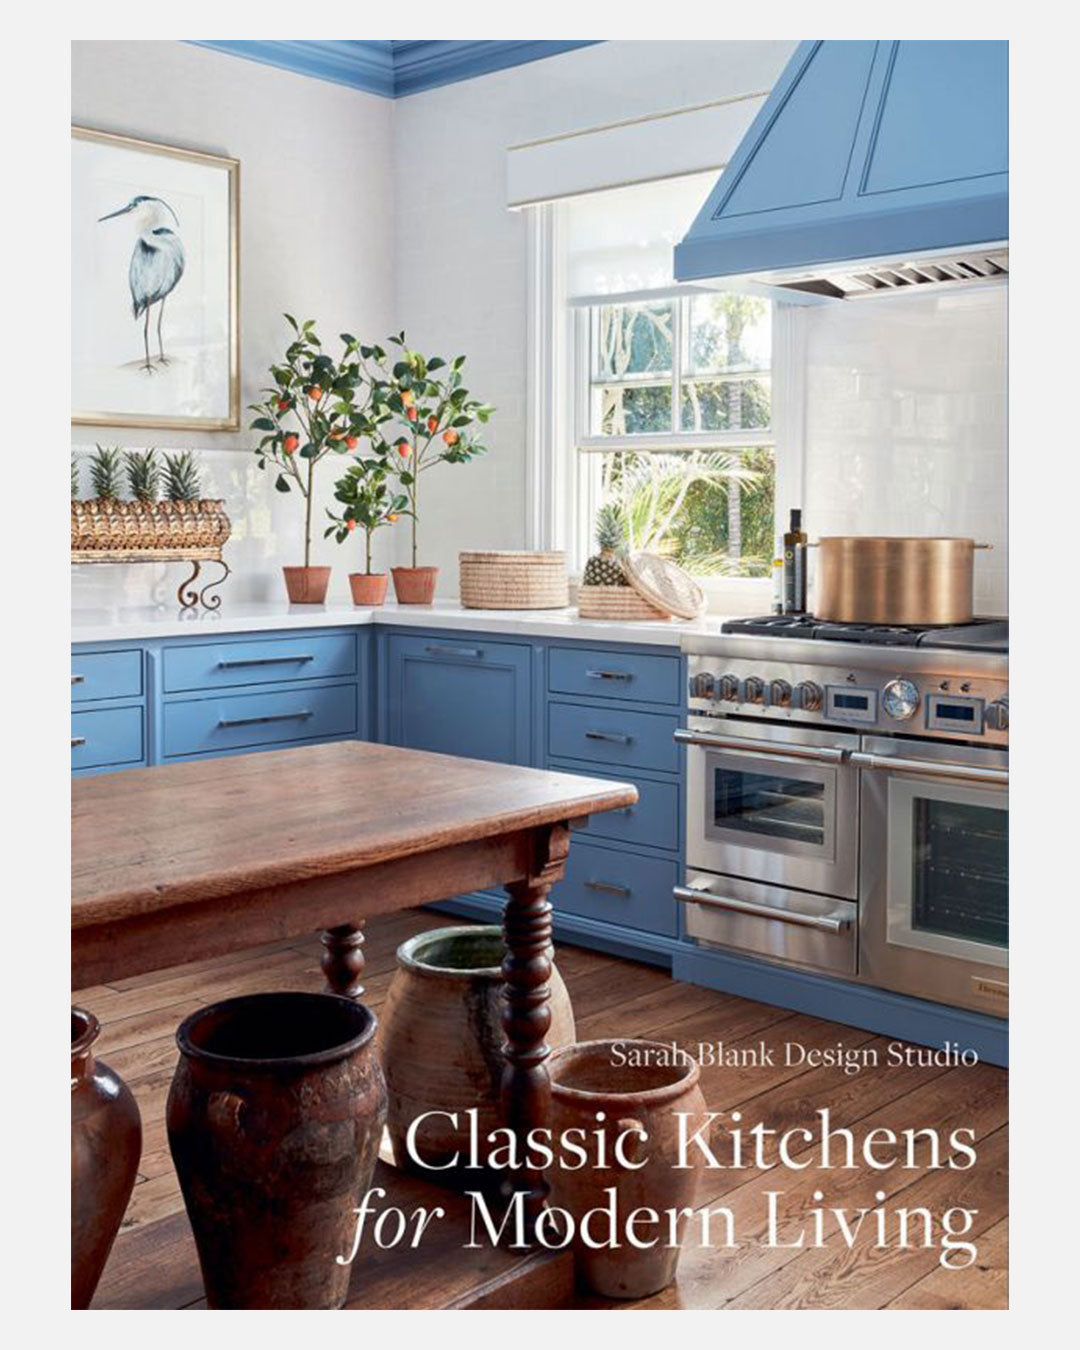 Classic Kitchens for Modern Living by Sarah Blank